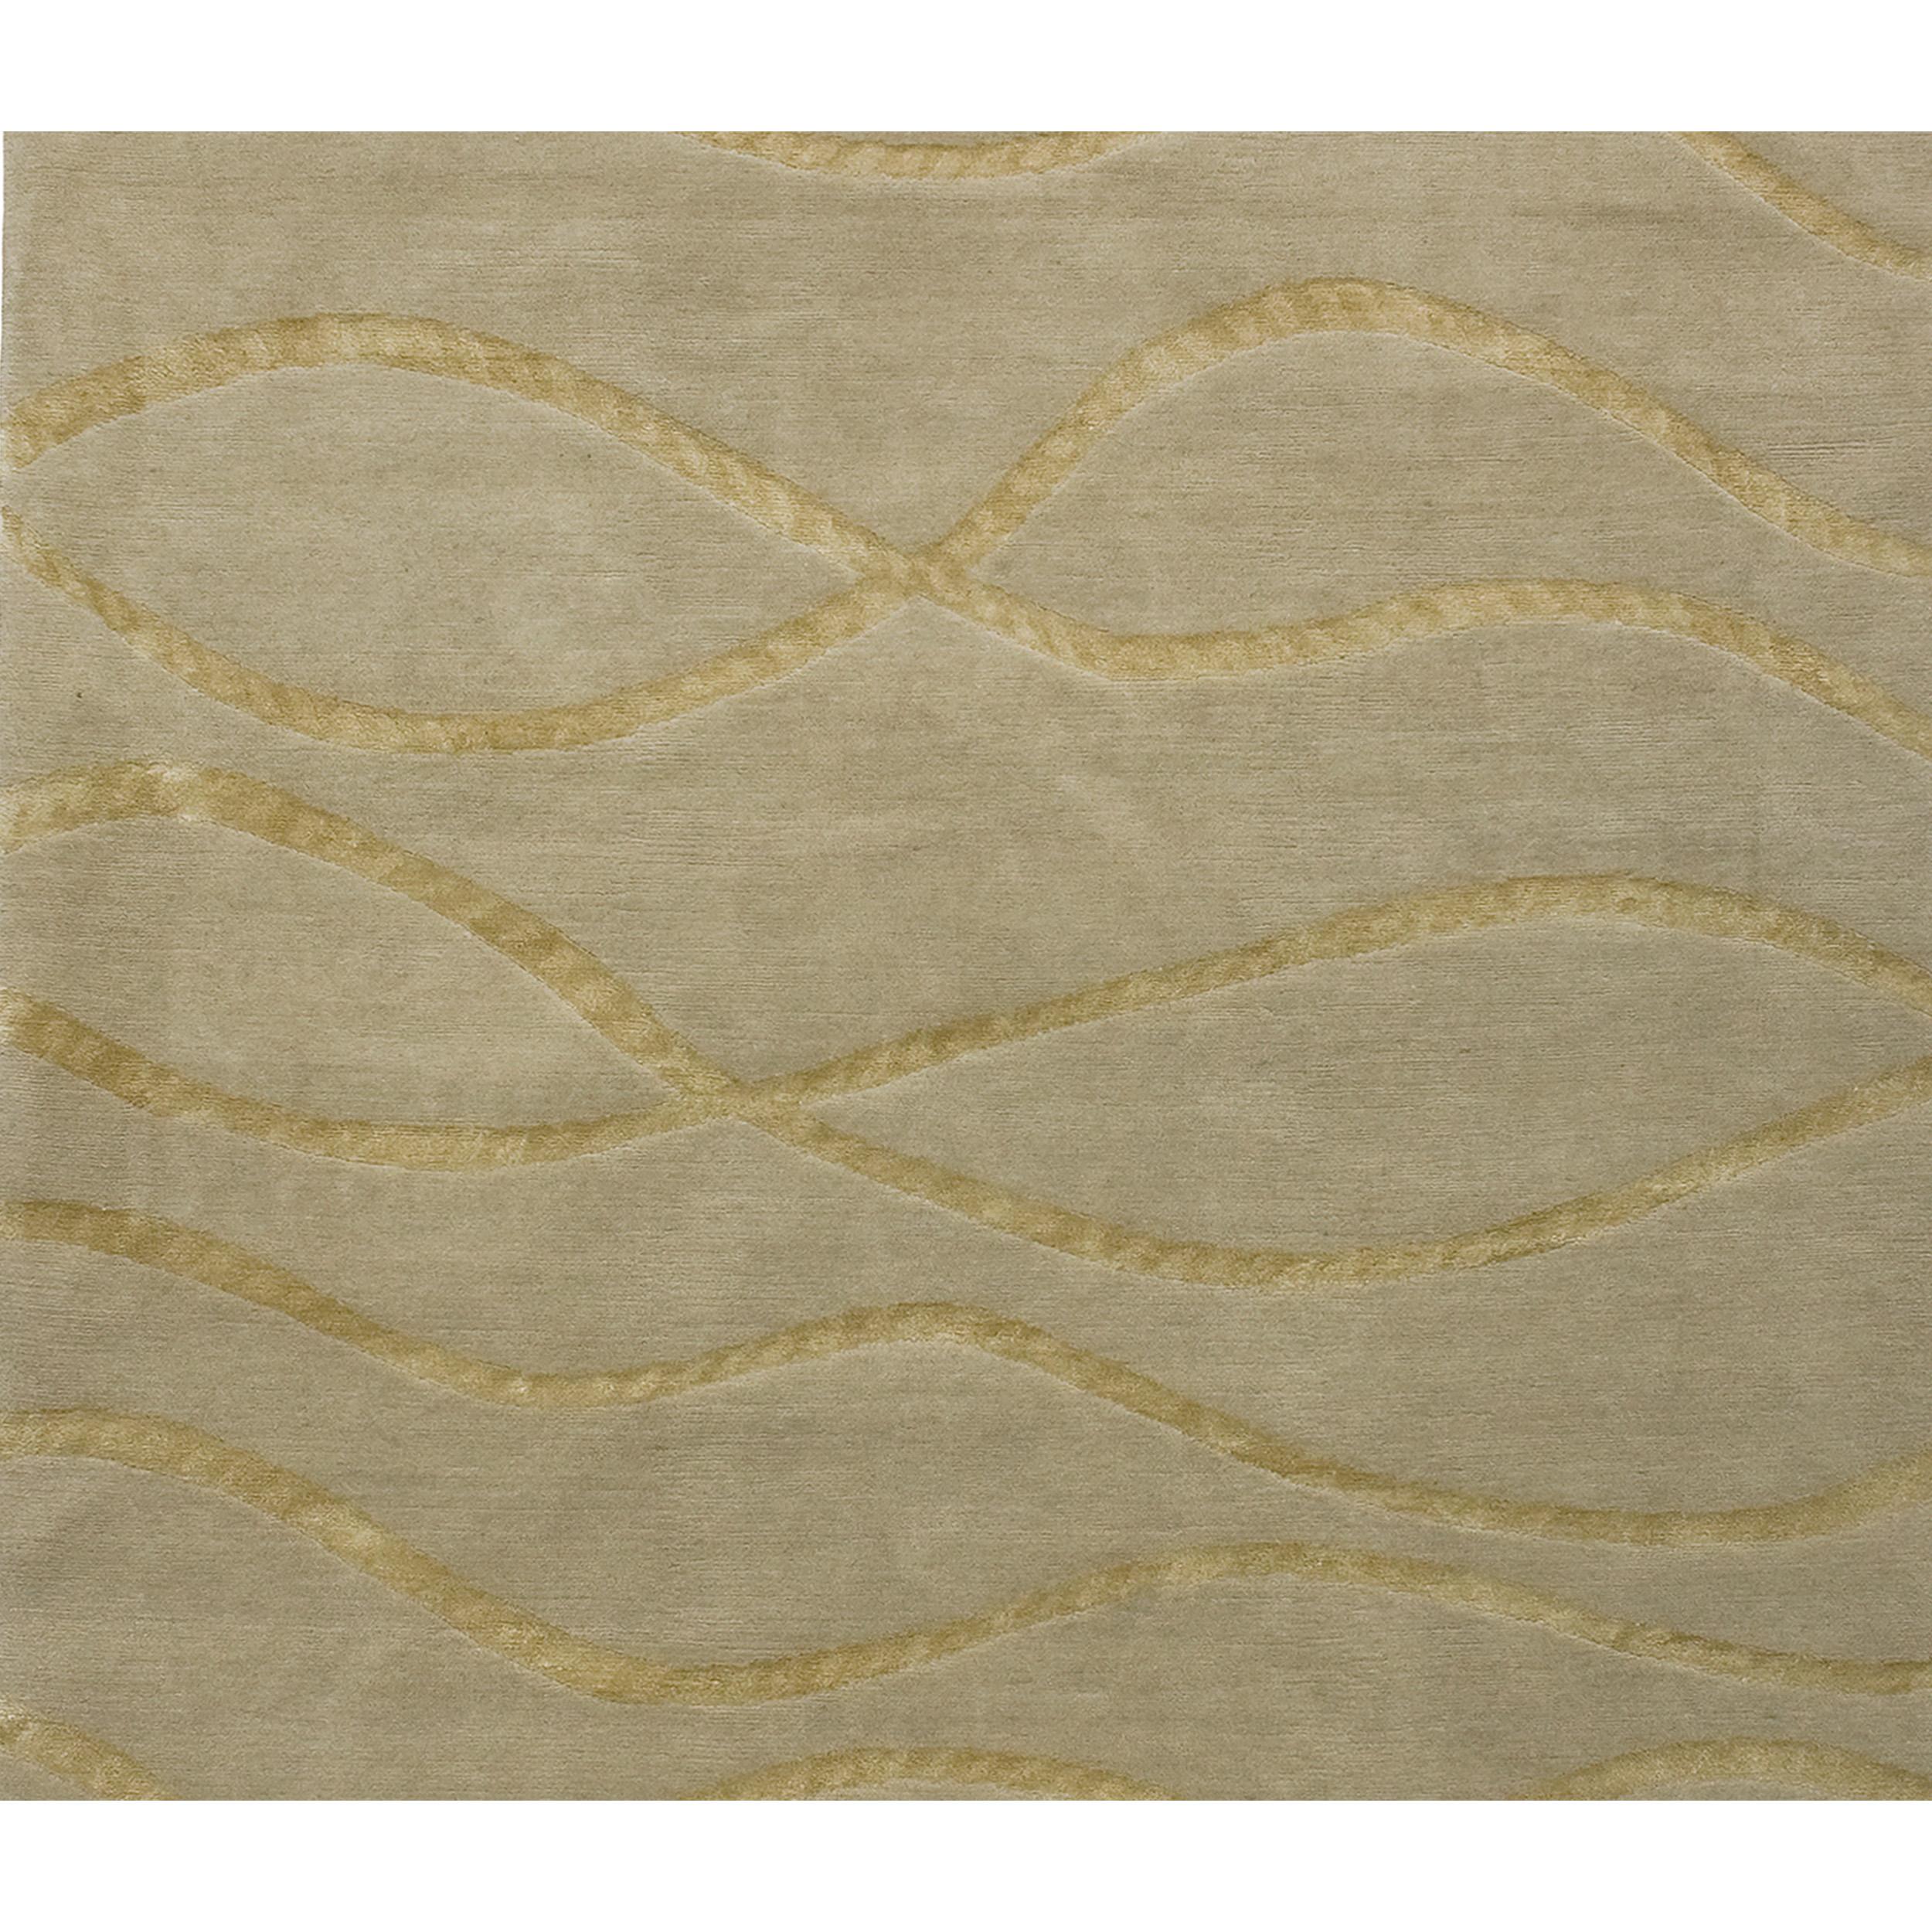 This luxurious modern rug was meticulously hand-knotted in Nepal. Crafted from a harmonious combination of silk and sumptuous wool, its softness, durability, and natural warmth make it an ideal partner to silk, adding a touch of sheer elegance. This